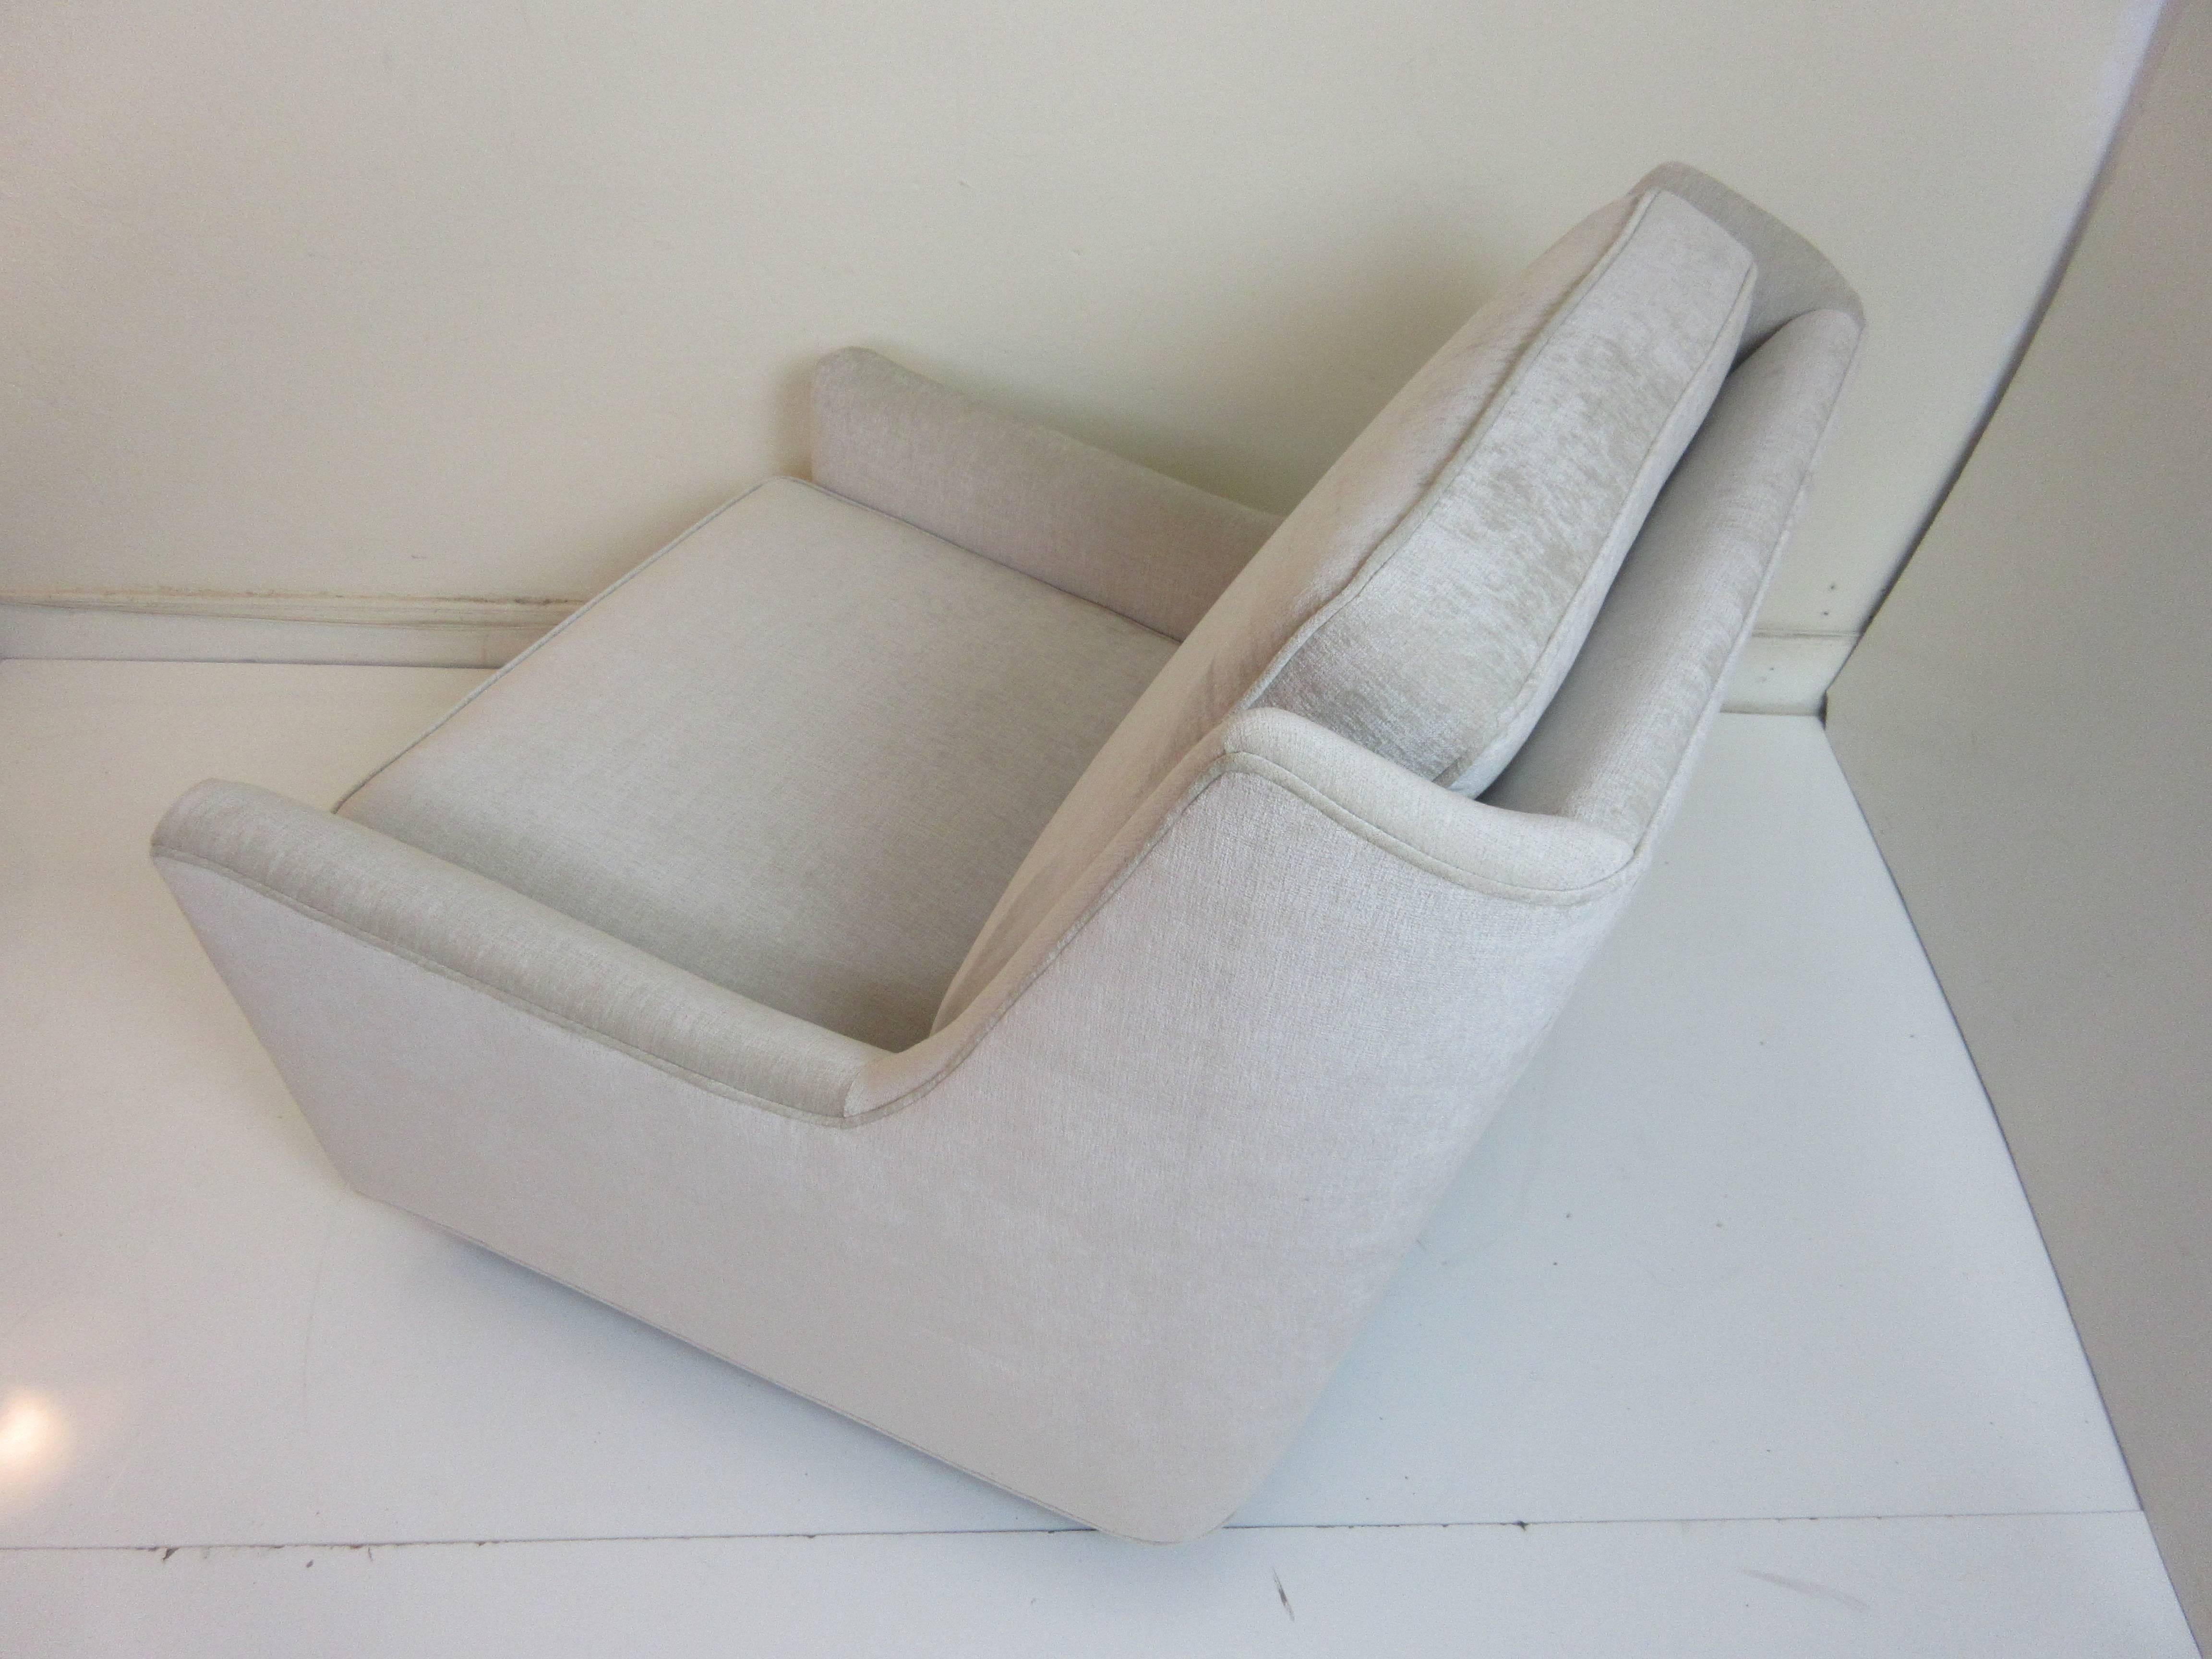 Floating Oversized Milo Baughman Lounge Chair 1